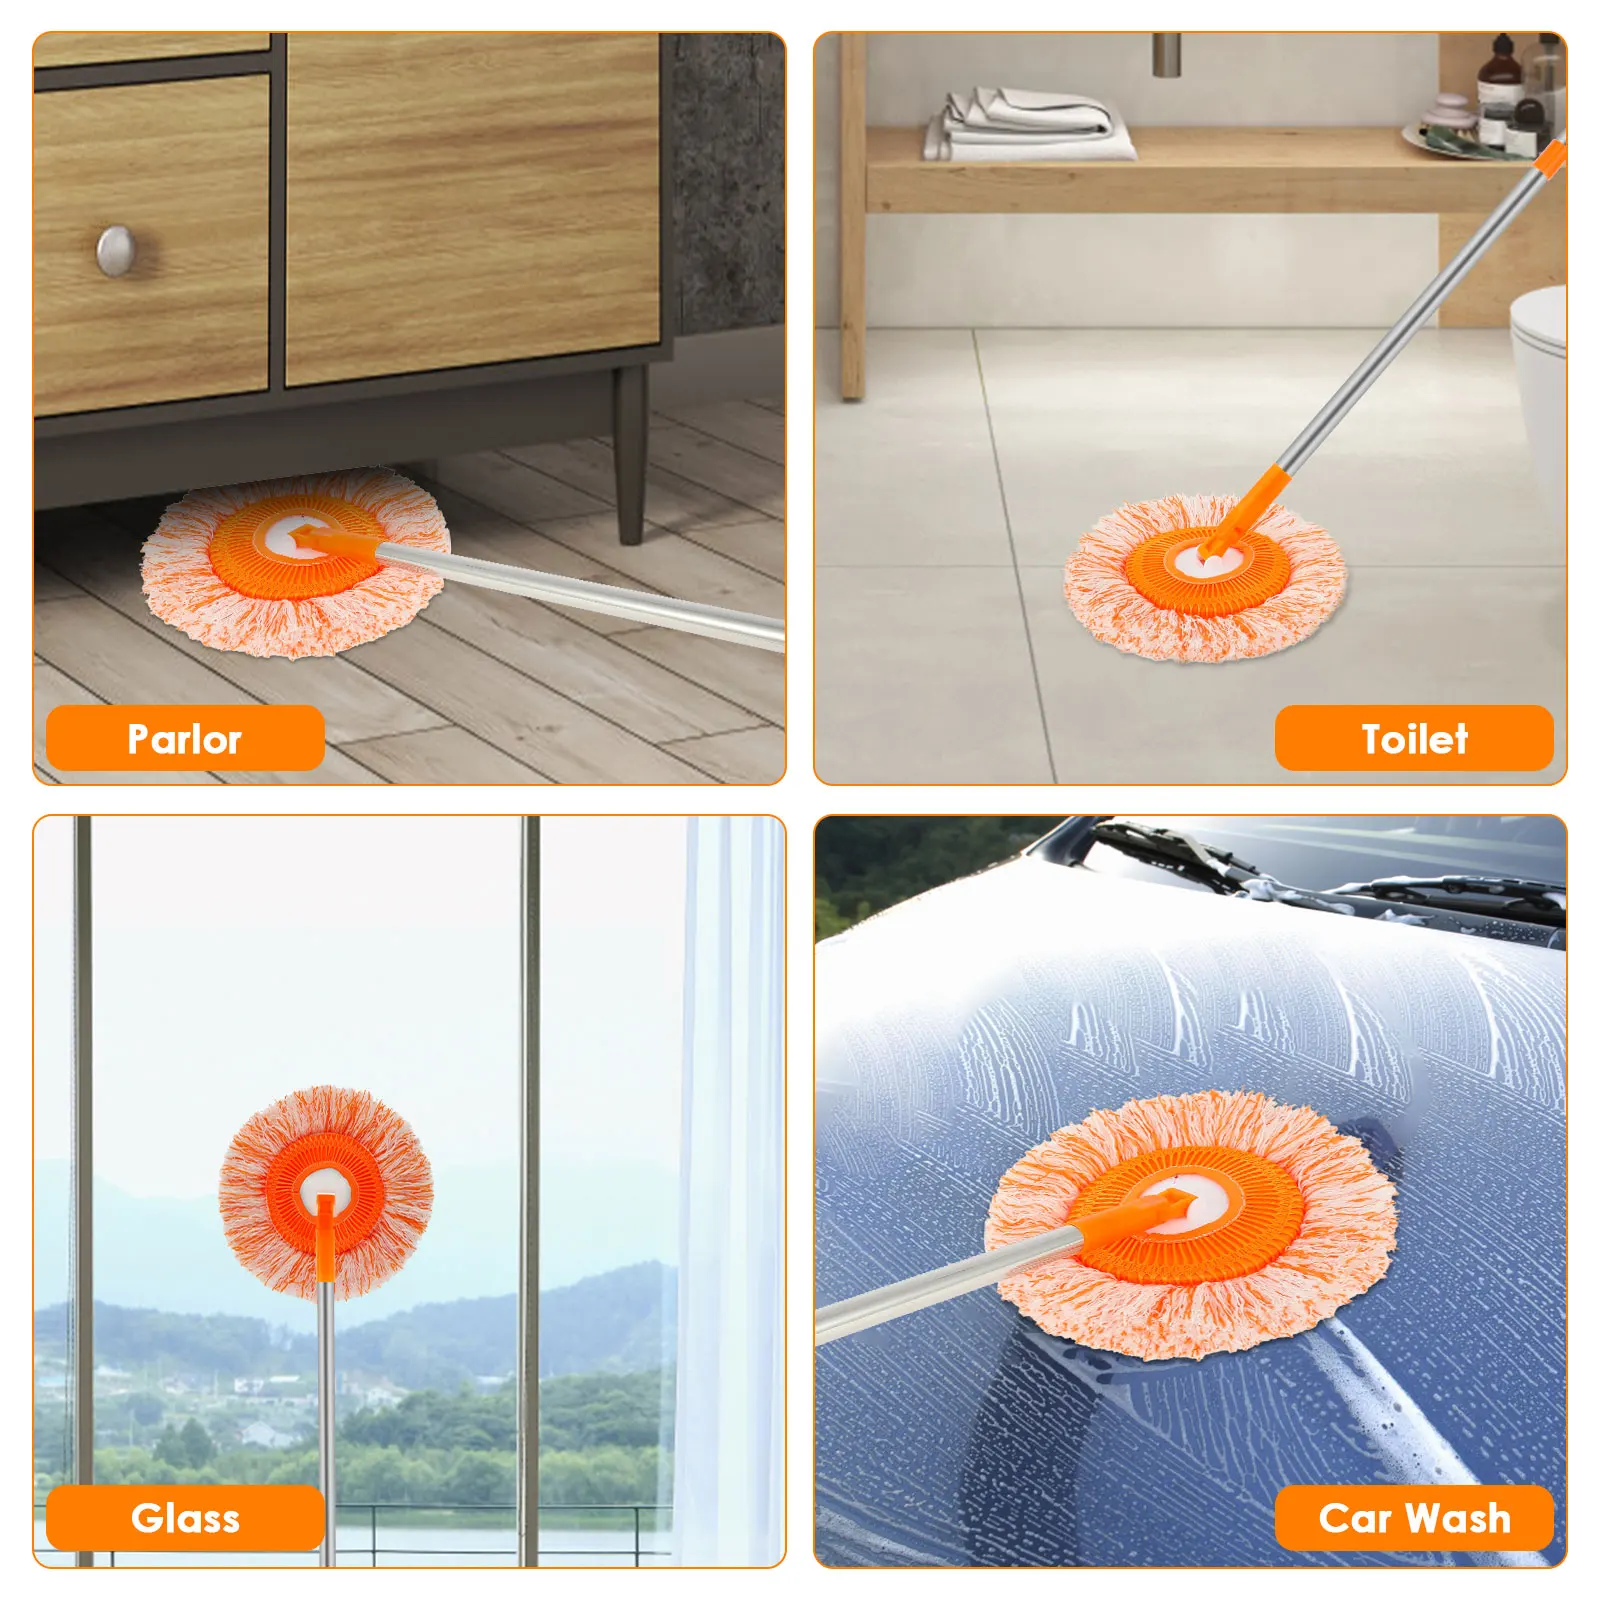 https://ae01.alicdn.com/kf/S70ae2afb40e44bd58b28c3fb11a6502fn/Microfiber-Cleaning-Mops-with-230cm-Extension-Pole-Dust-Mop-Adjustable-Round-Chenille-Magic-Dust-Mop-for.jpg